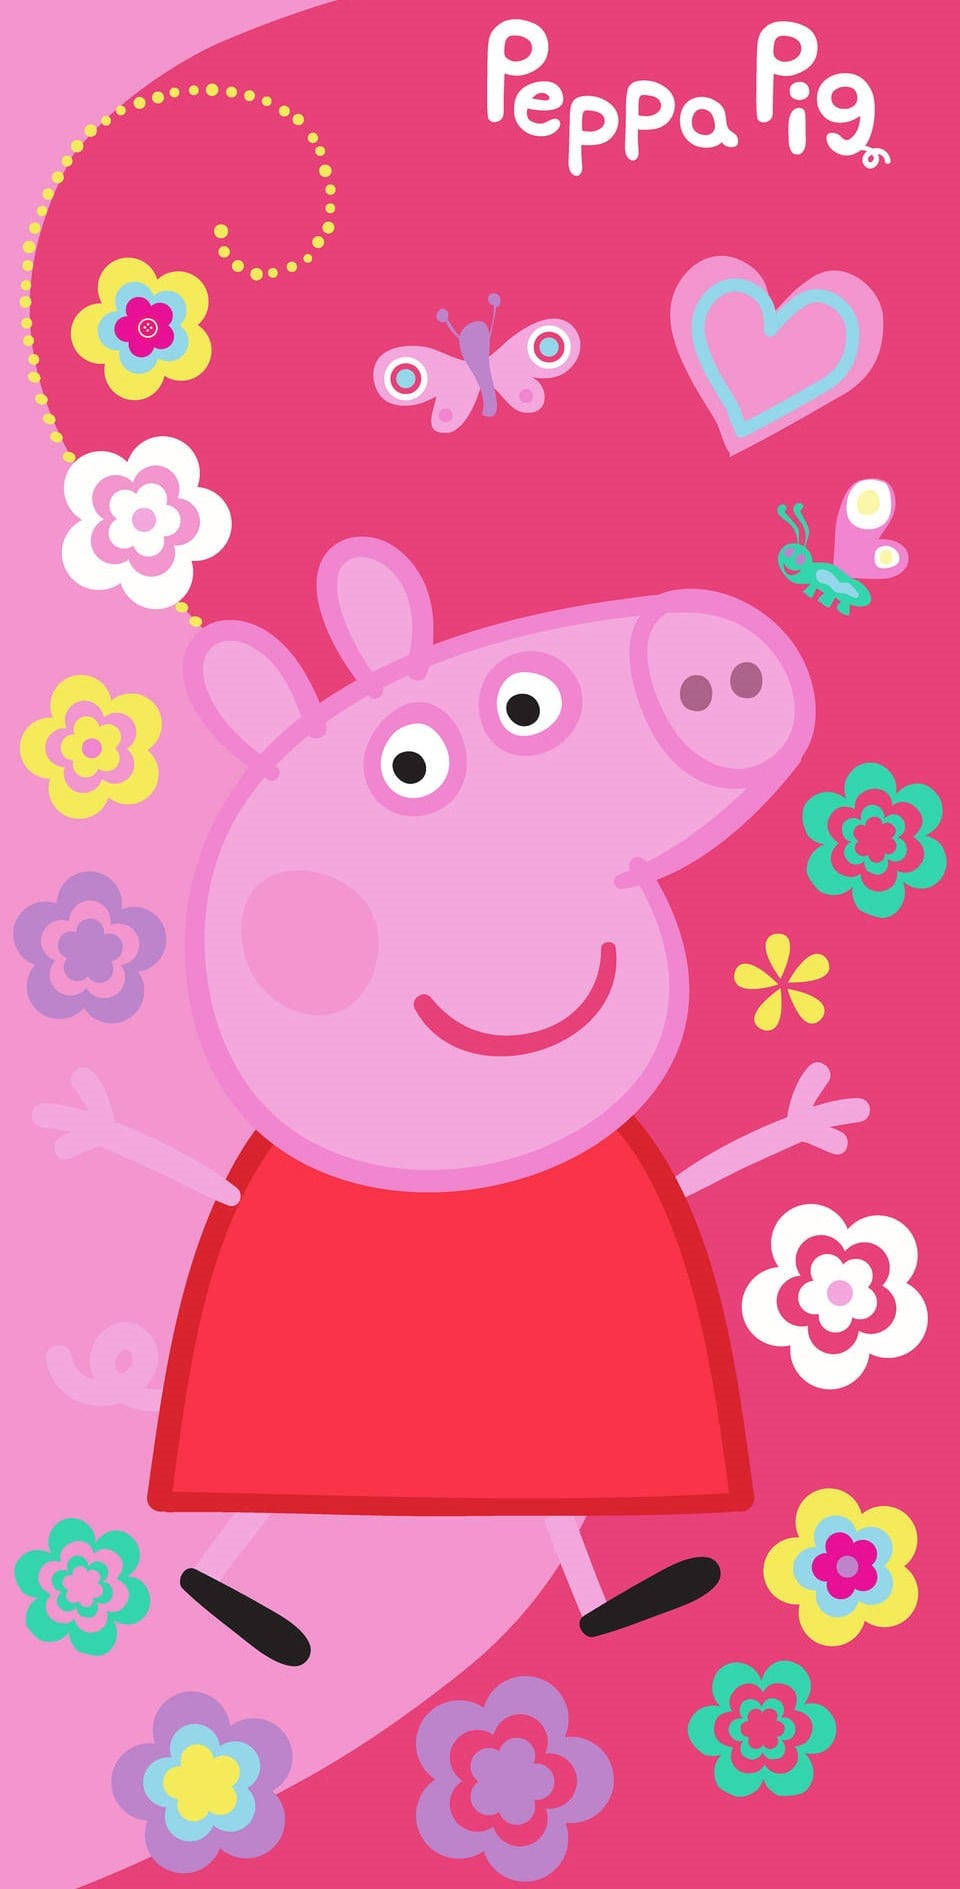 Peppa Pig Inspired Iphone Theme Background